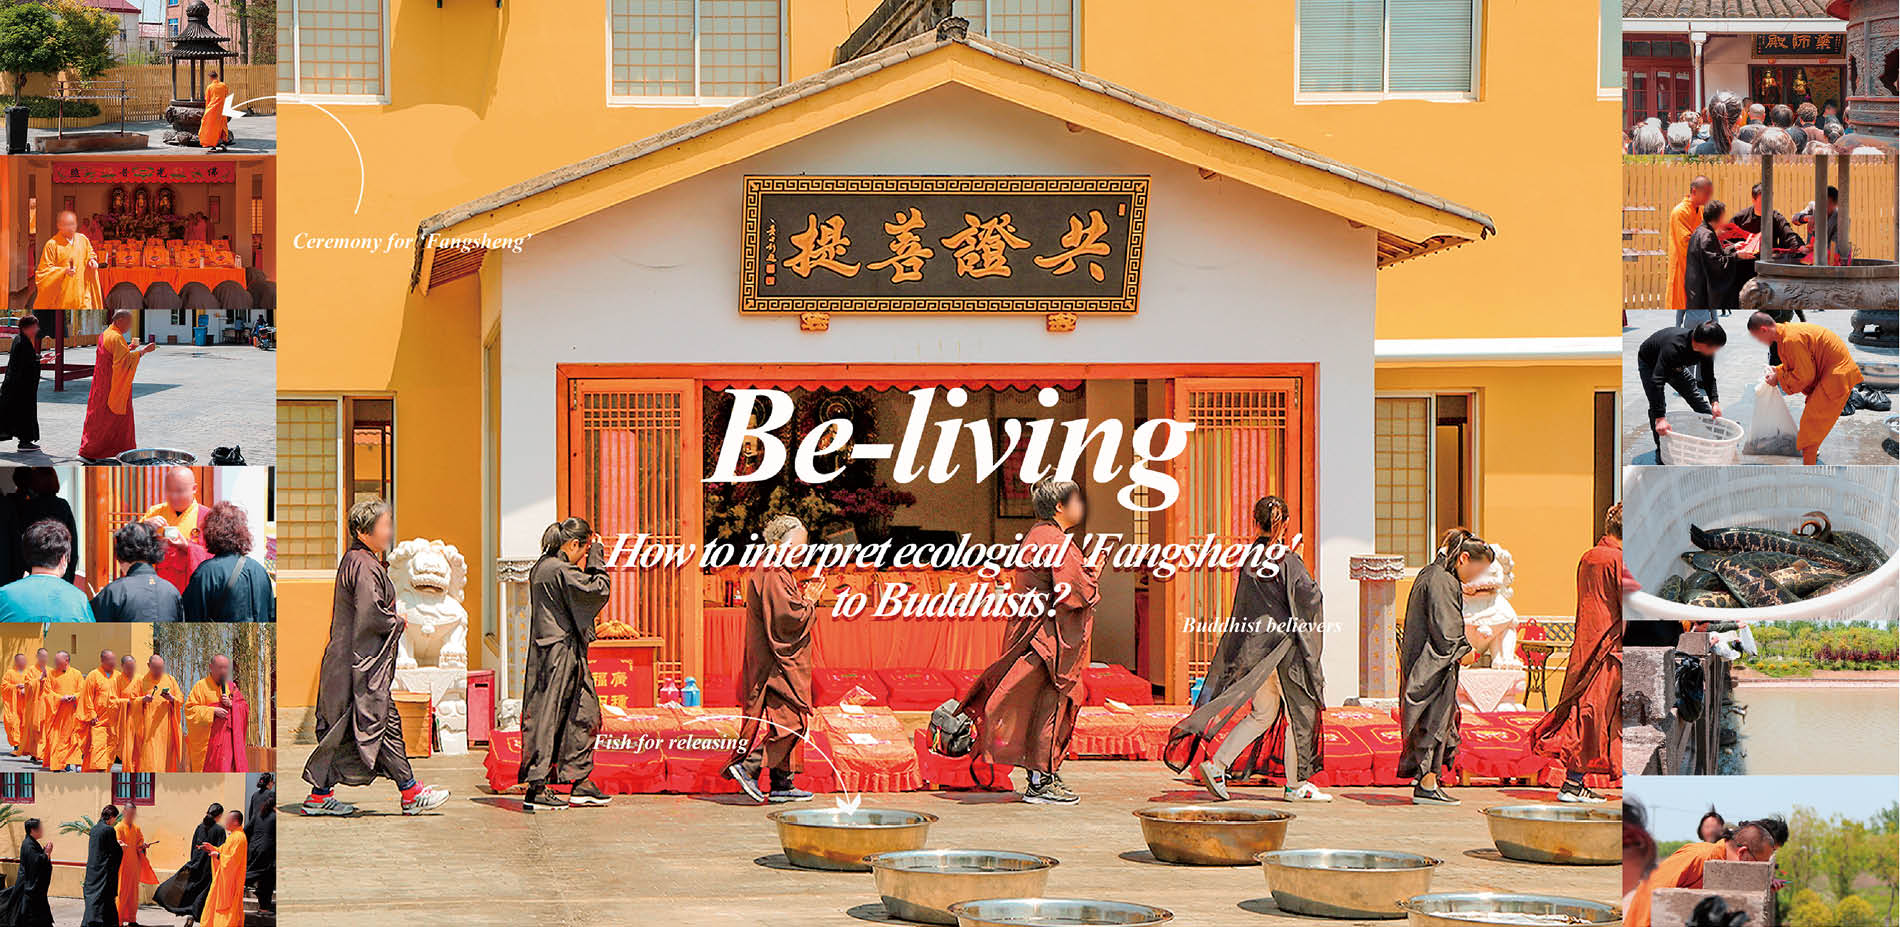 "Be-living:How to Interpret Ecological 'Fangsheng' to Buddhists"